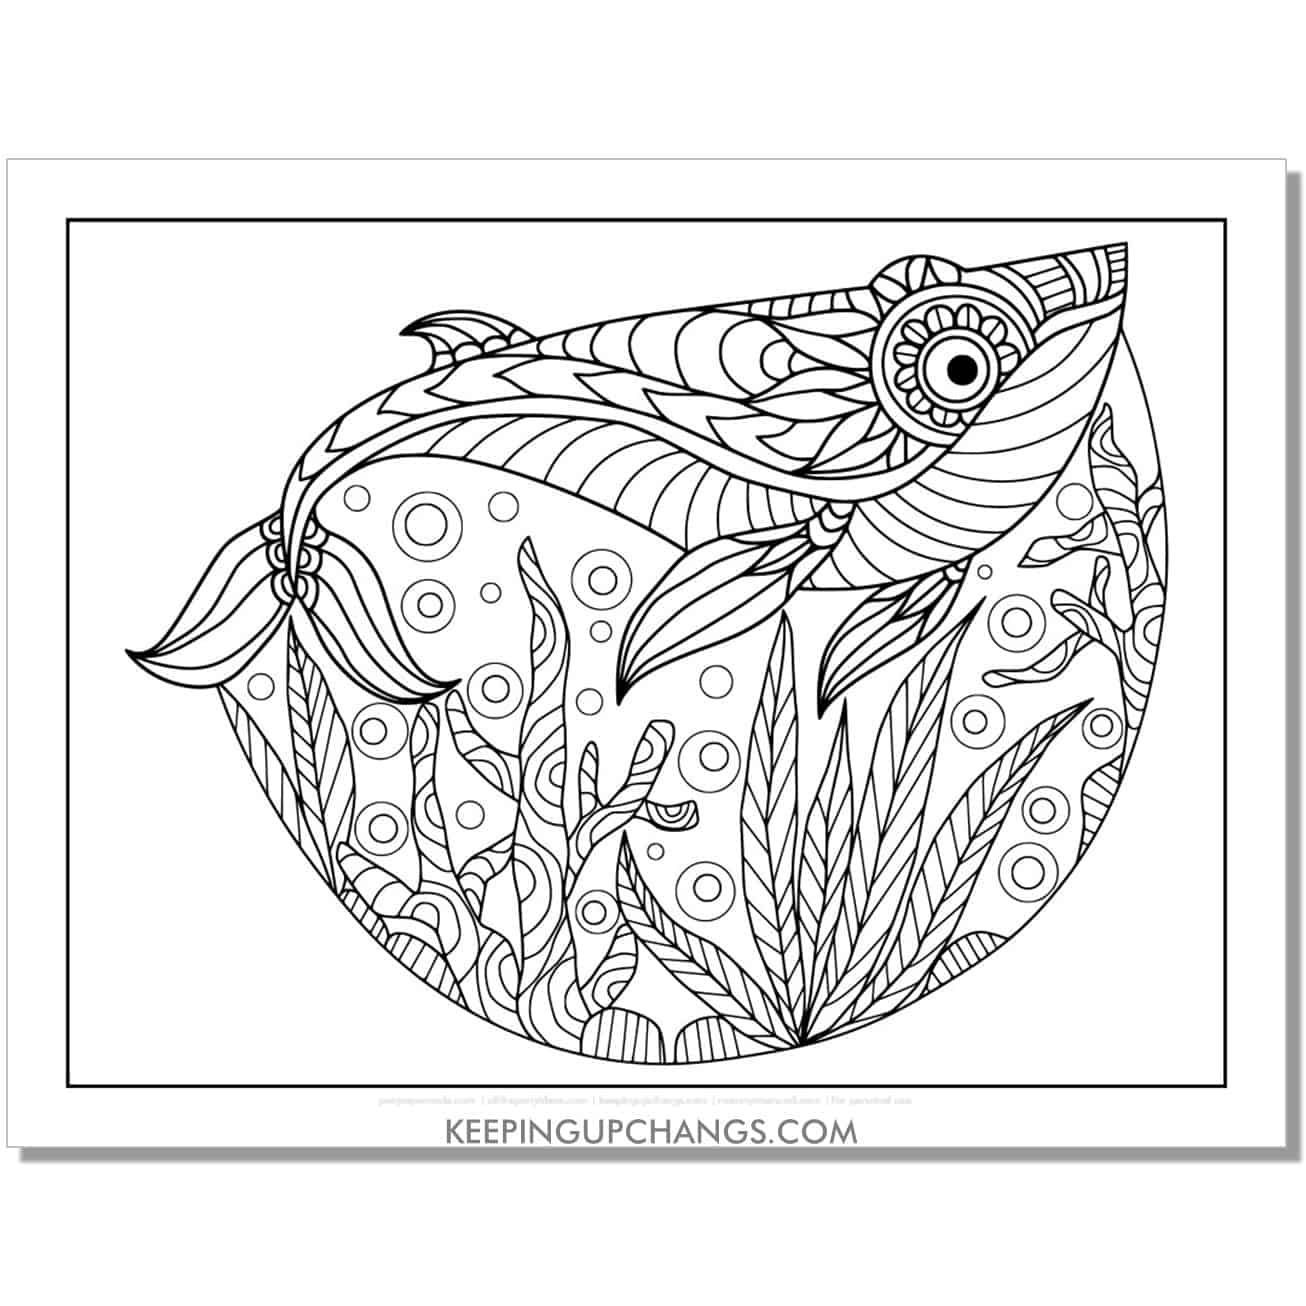 free intricate whale coloring page, sheet for teens, adults.